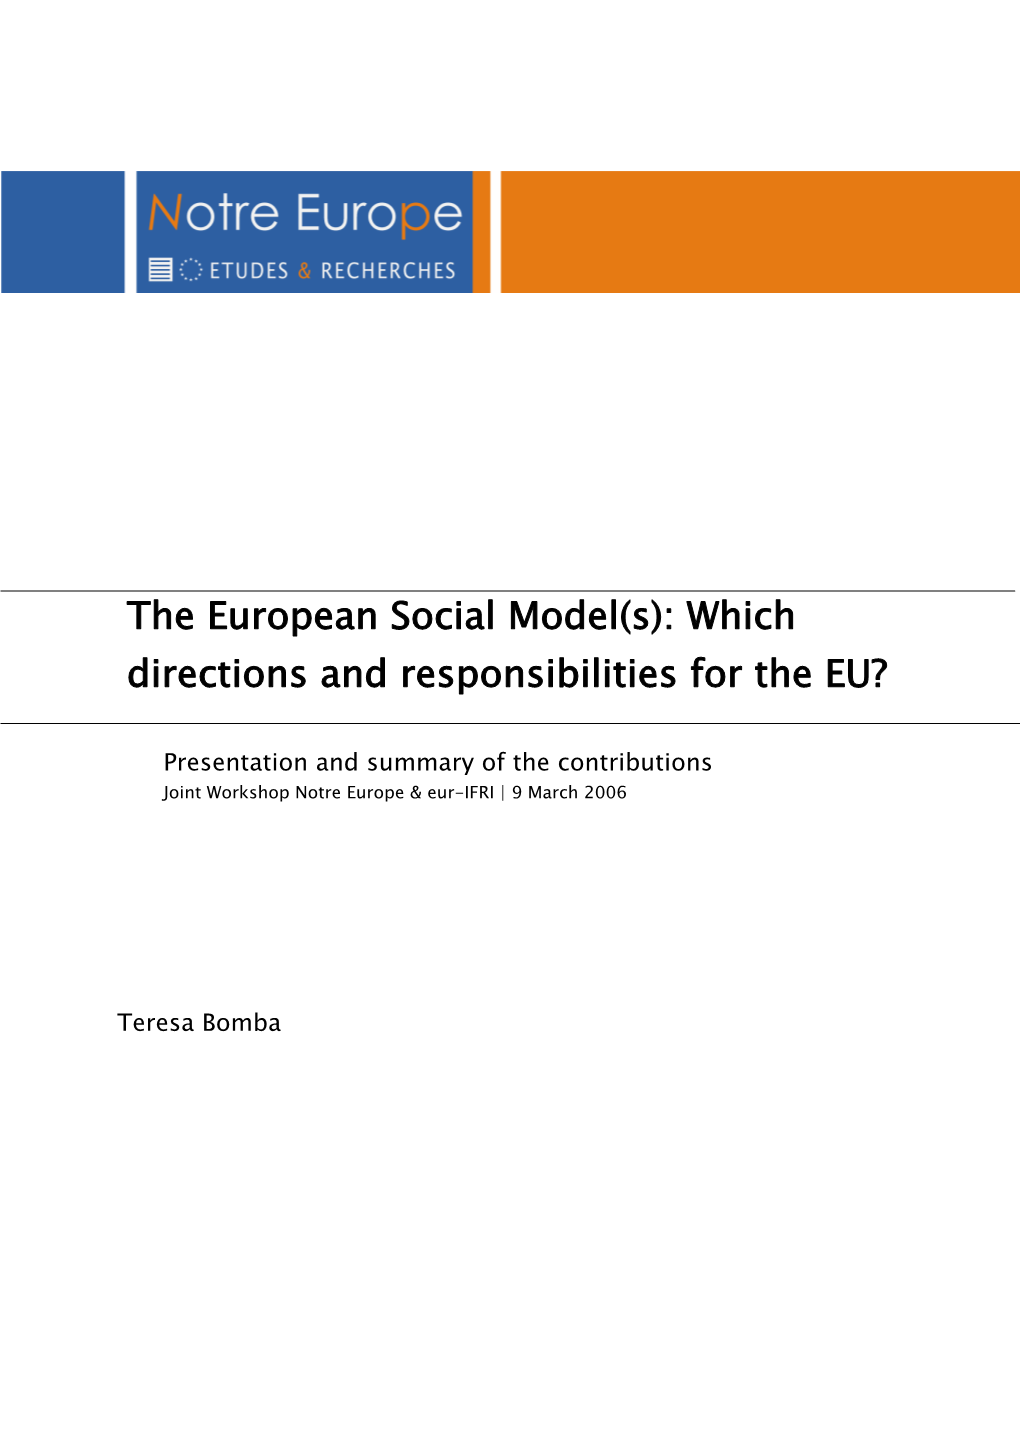 The European Social Model(S): Which Directions and Responsibilities for the EU?